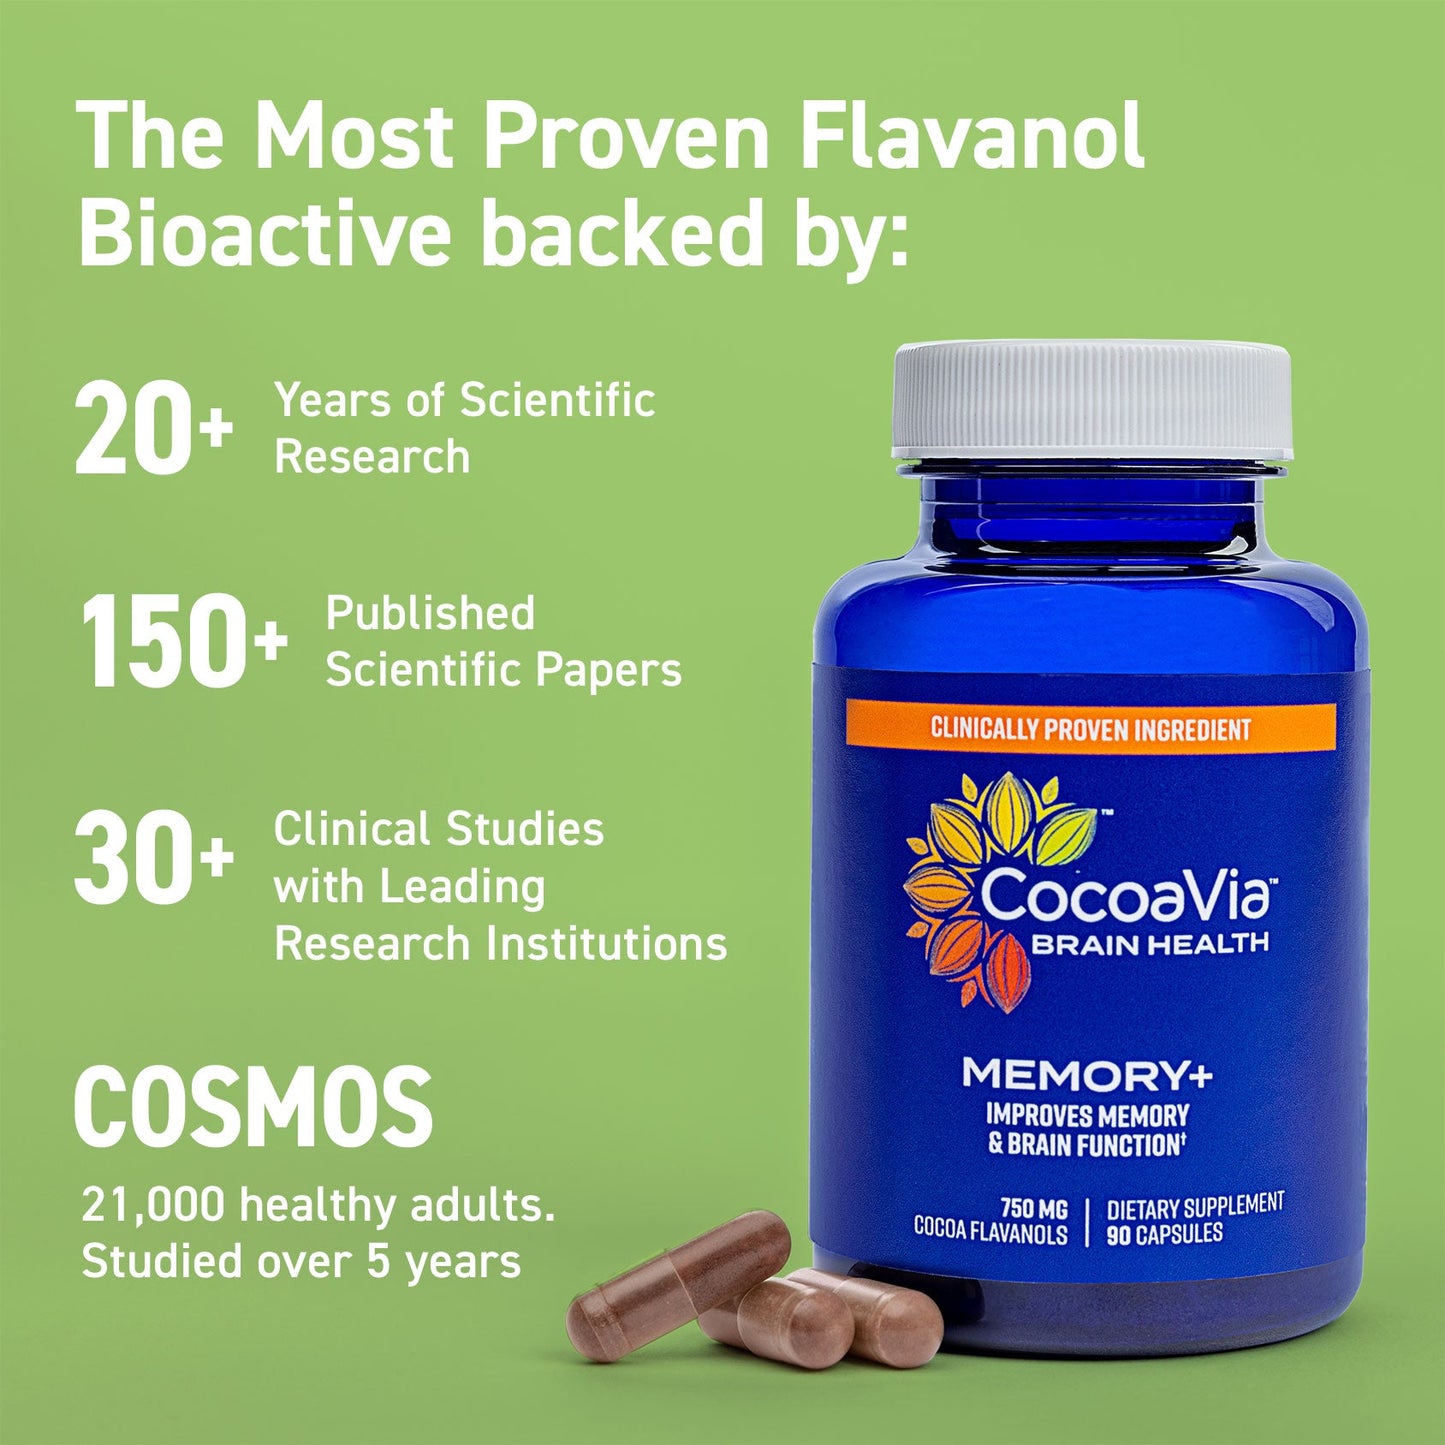 the most clinically proven flavanol bioactive. 20+ years of scientific research. 150+ published scientific papers. 30+ clinical studies. 